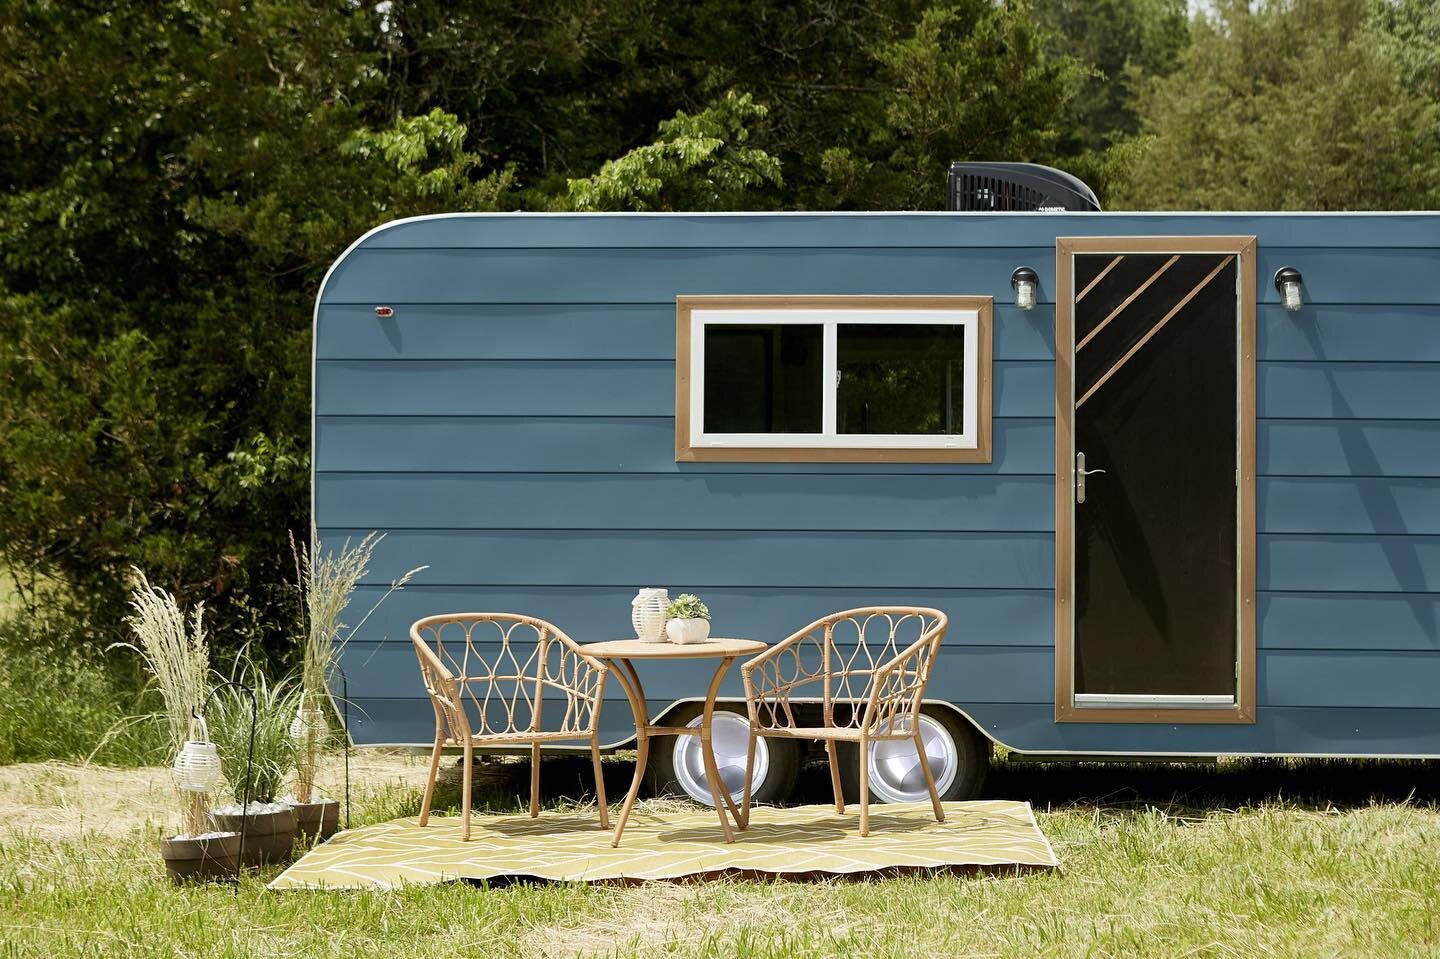 Unique Opportunity: Who wants to go glamping? 

These gorgeous campers from our friends at @pomelo.grove are looking for a new home. They have full bathroom, cozy bed, and eat-in dining. Built by Aero Build!

For more information please contact: erin